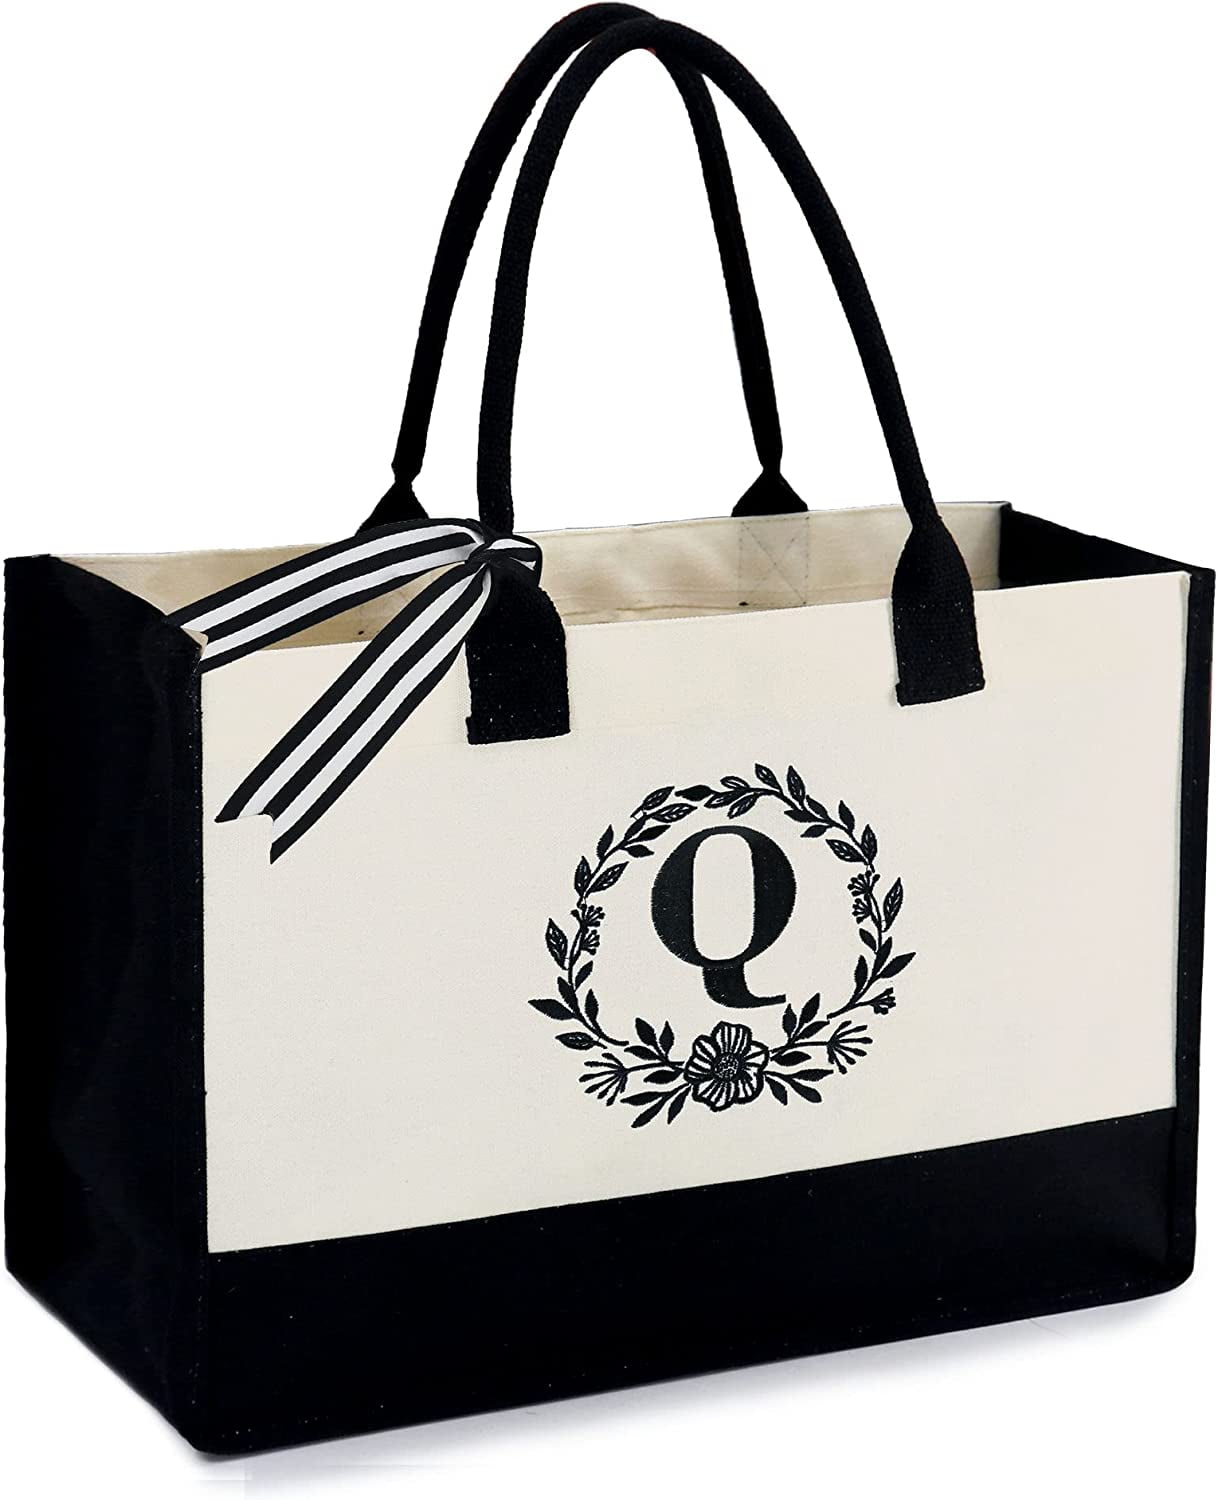 OSLEI Initial Canvas Tote Bag with Zipper Pocket 13OZ Embroidery